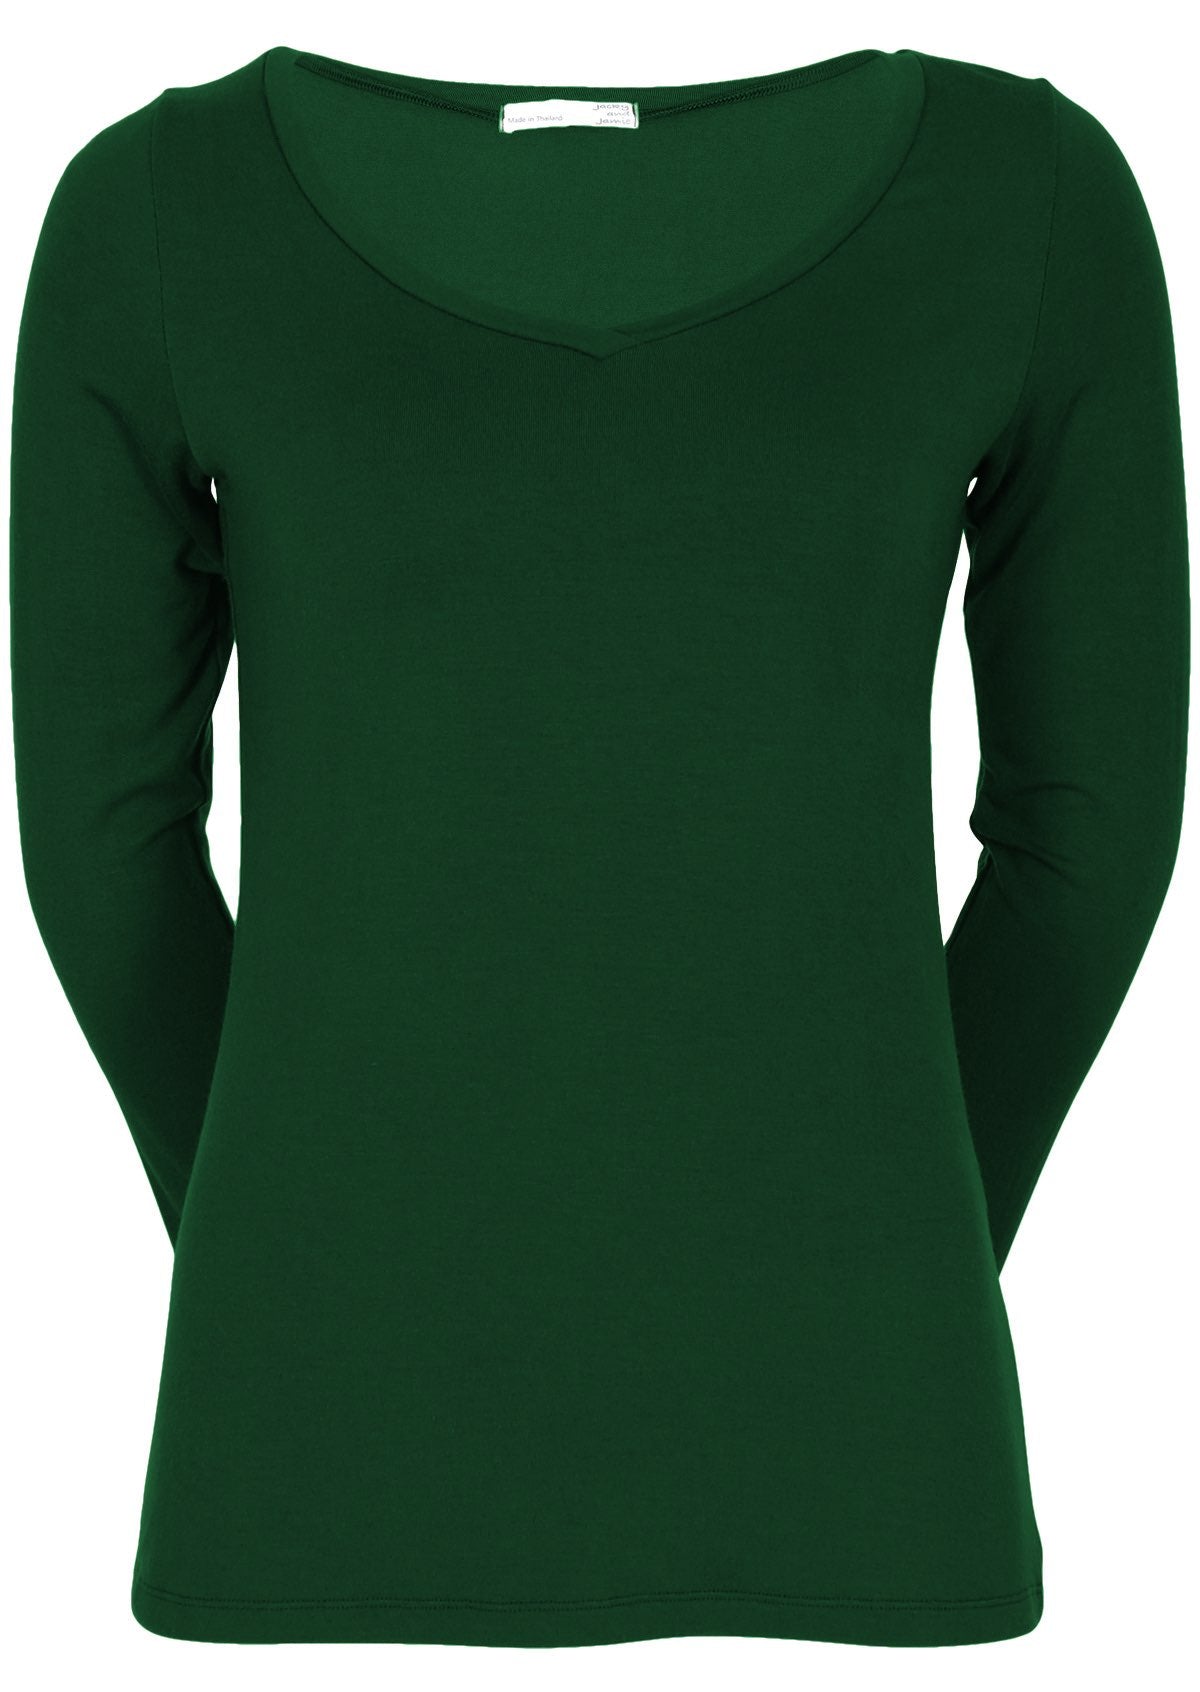 Front view of women's green long sleeve stretch v-neck soft rayon top.